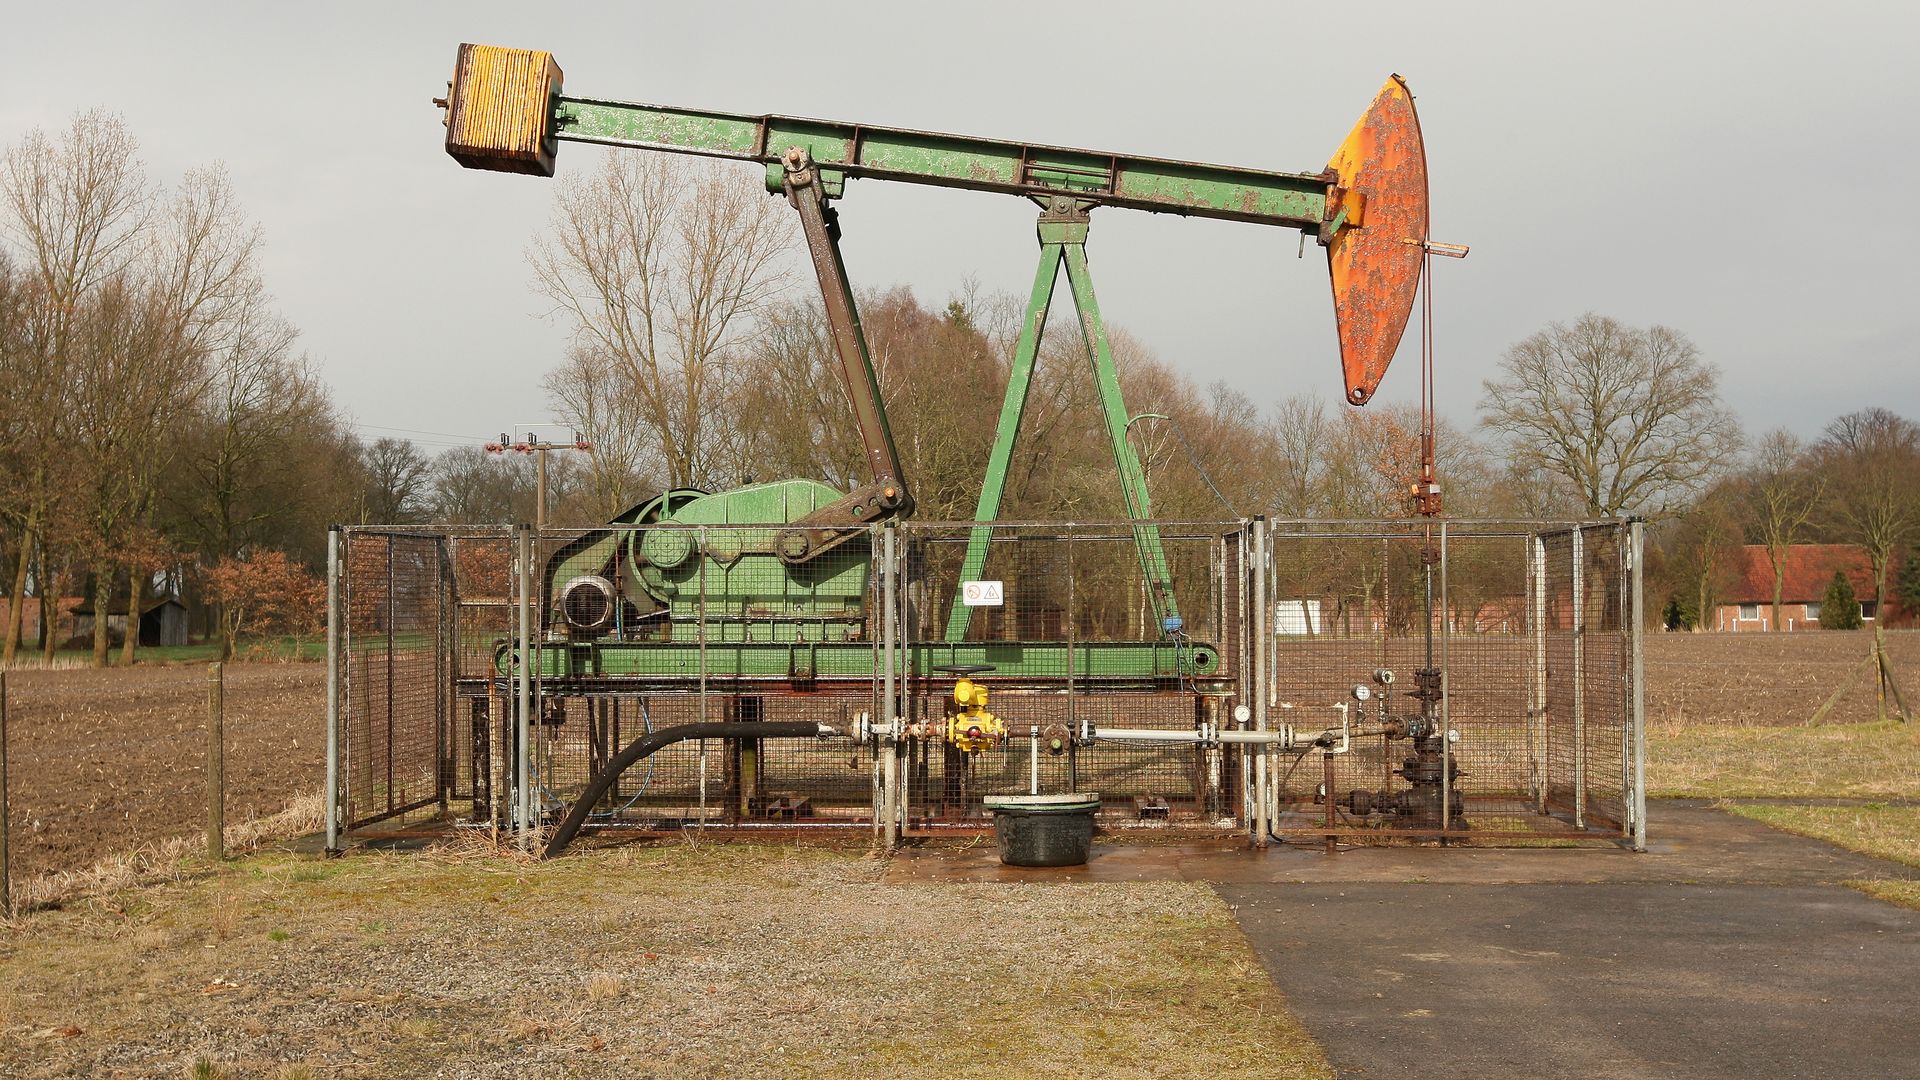 An oil pumpjack operated by ExxonMobi